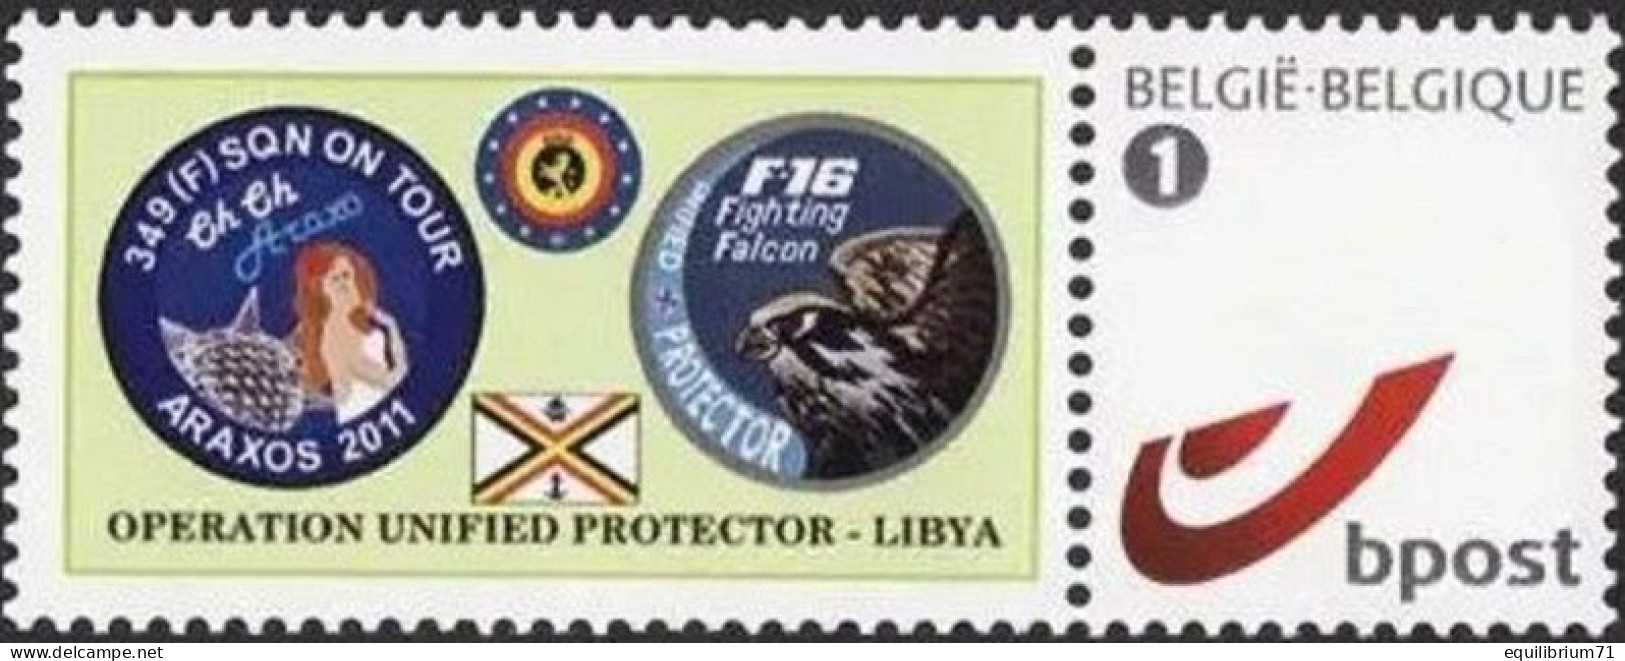 DUOSTAMP** / MYSTAMP** - Operation Unified Protector - NATO And Libya - Militaria